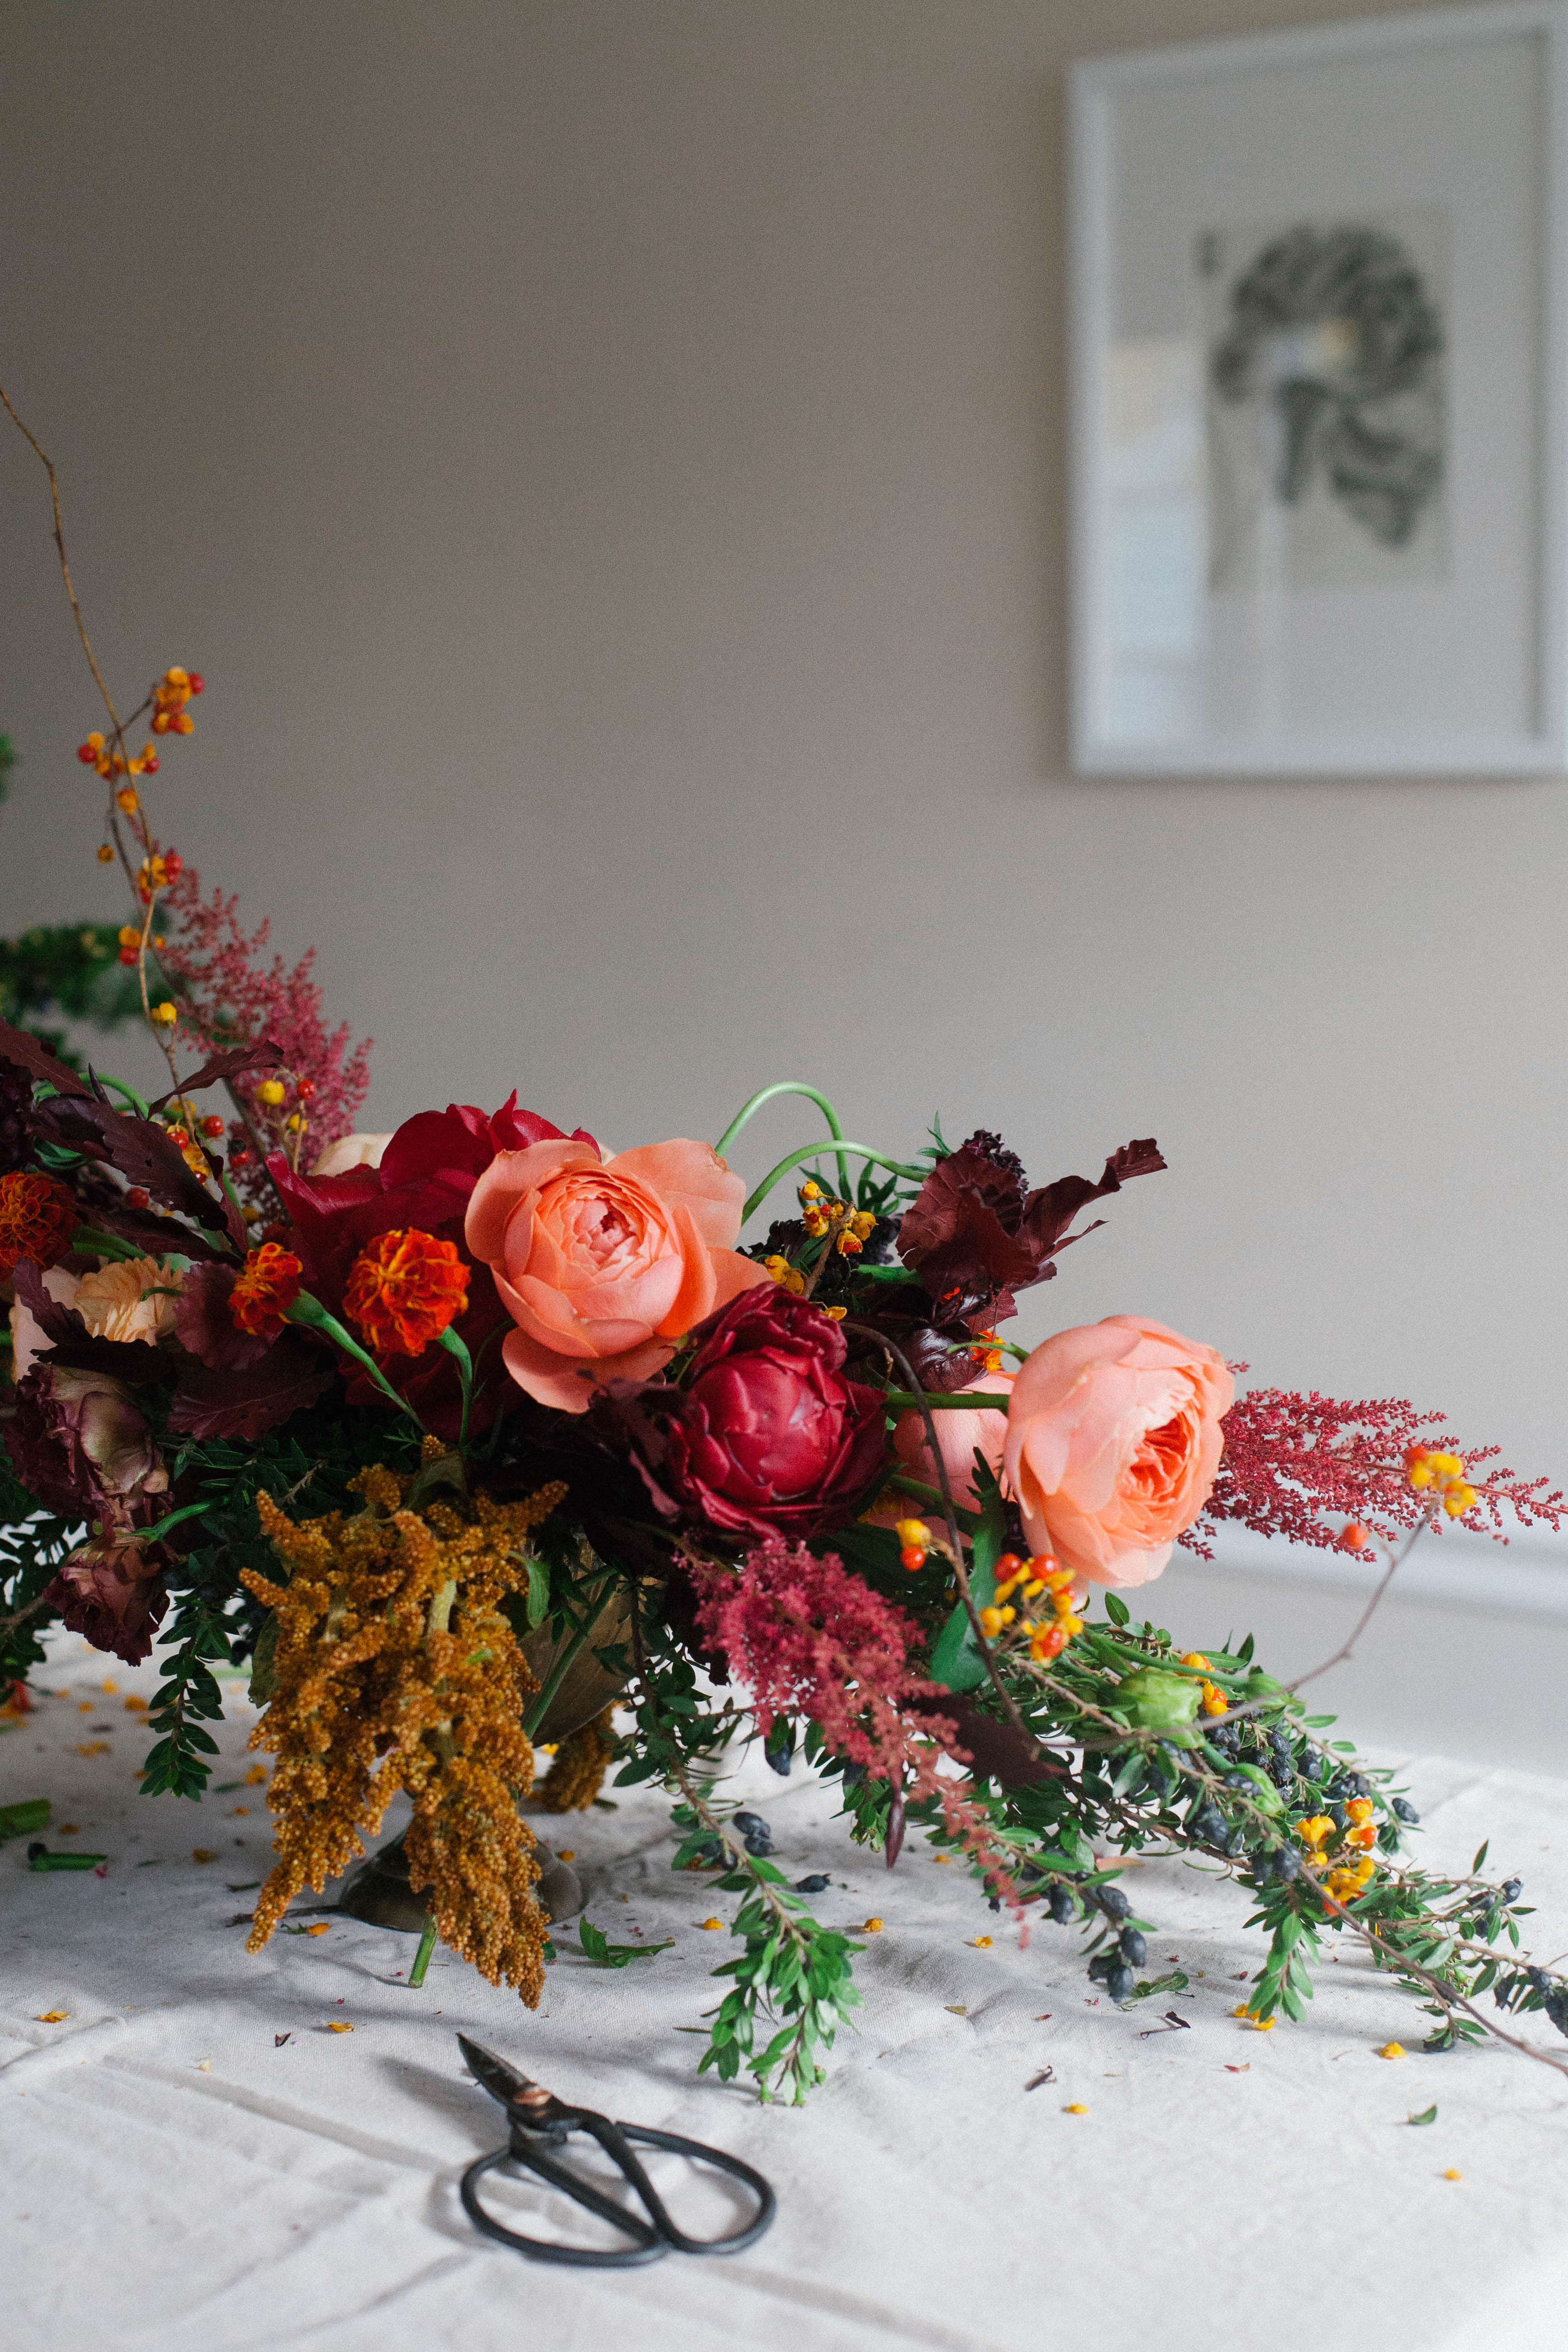 A Daily Something | Wintry Floral Centerpiece